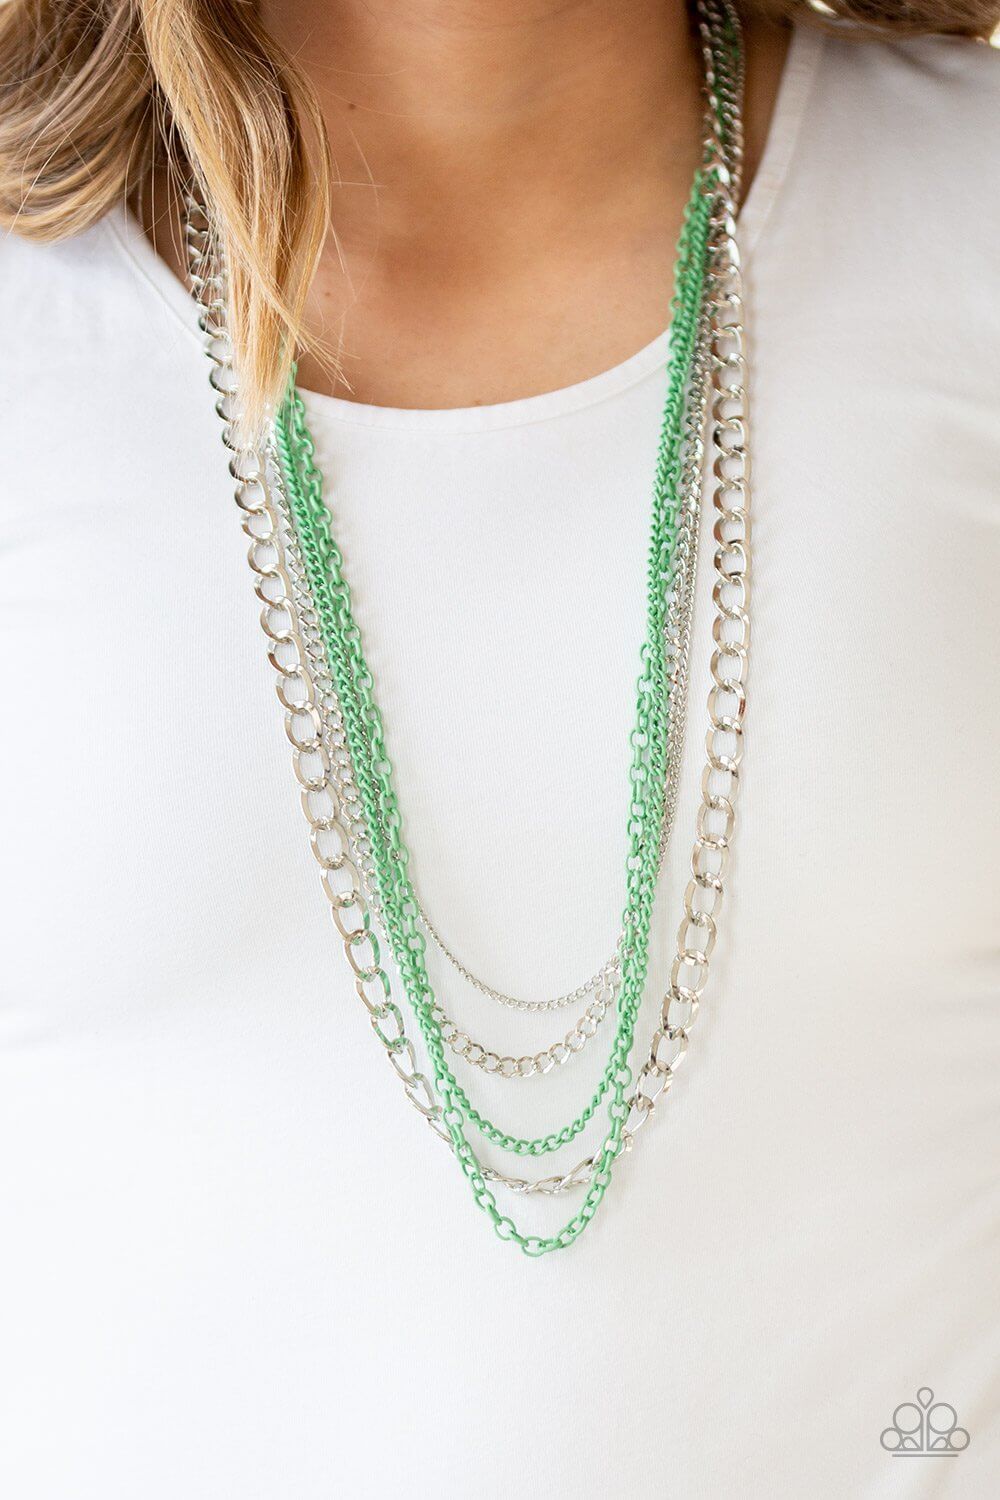 Industrial Vibrance Green Necklace - Princess Glam Shop